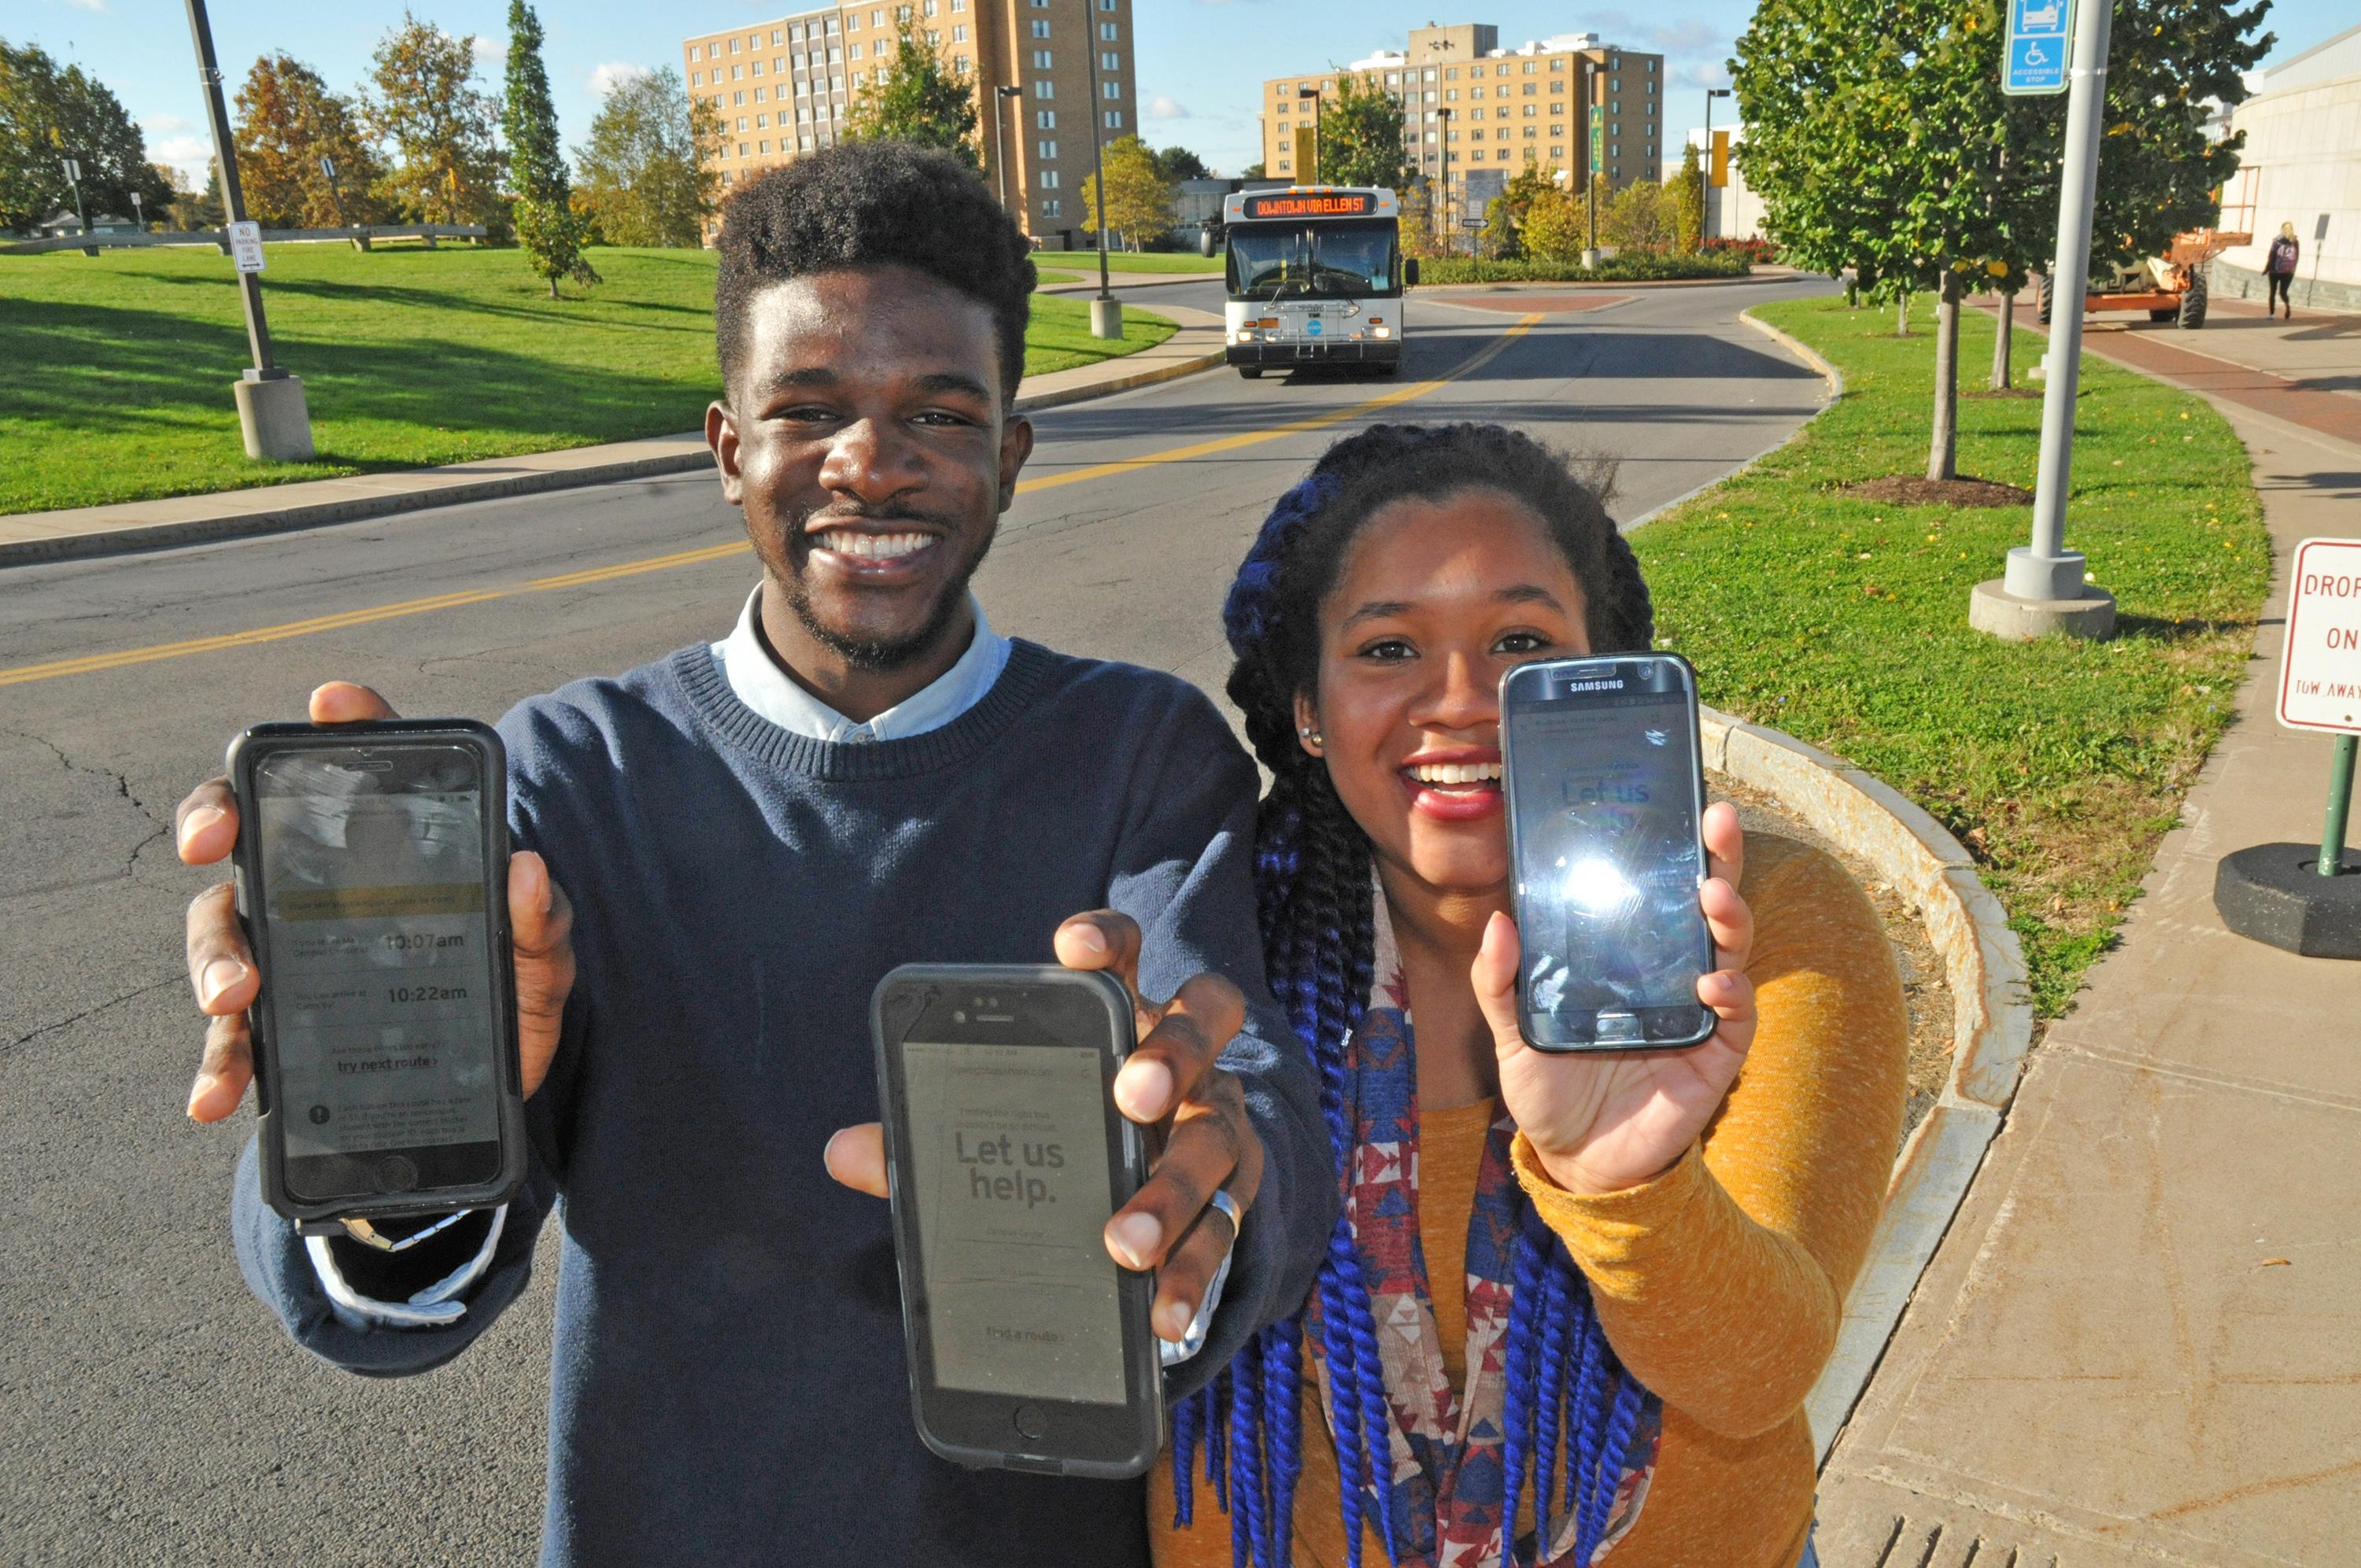 Students show BusShare web app on their smartphones